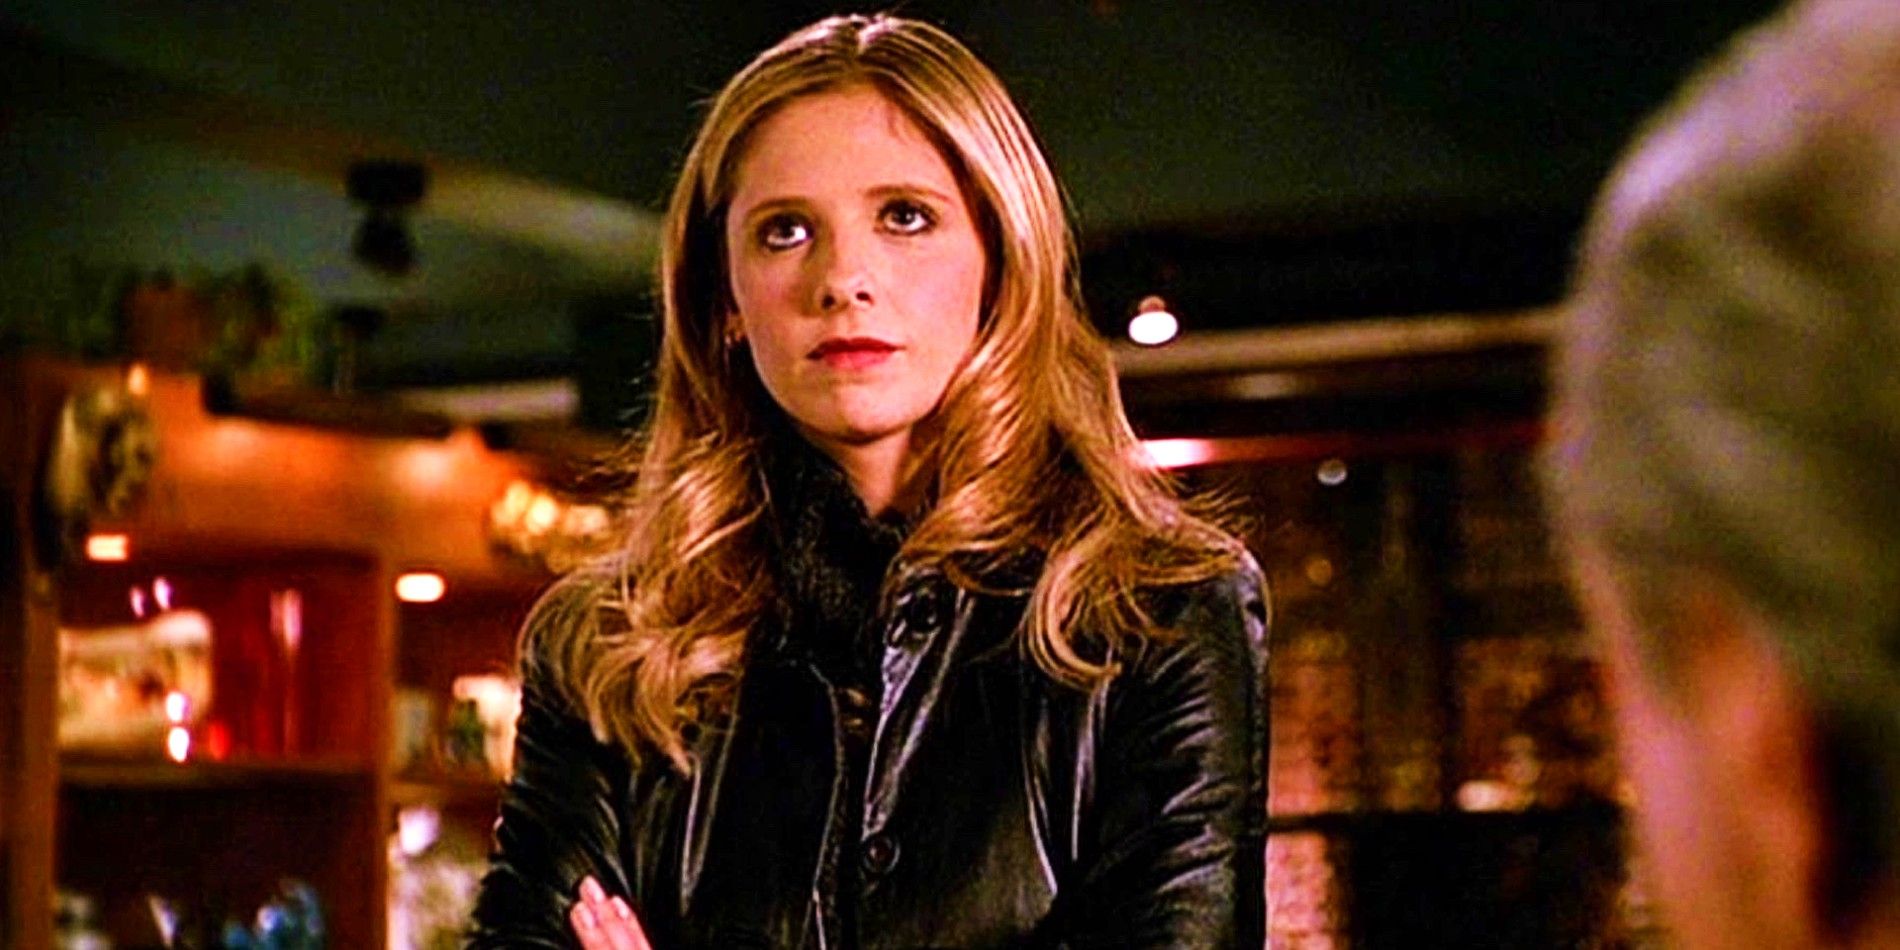 Sarah Michelle Gellar as Buffy Summers looking determined in Buffy the Vampire Slayer